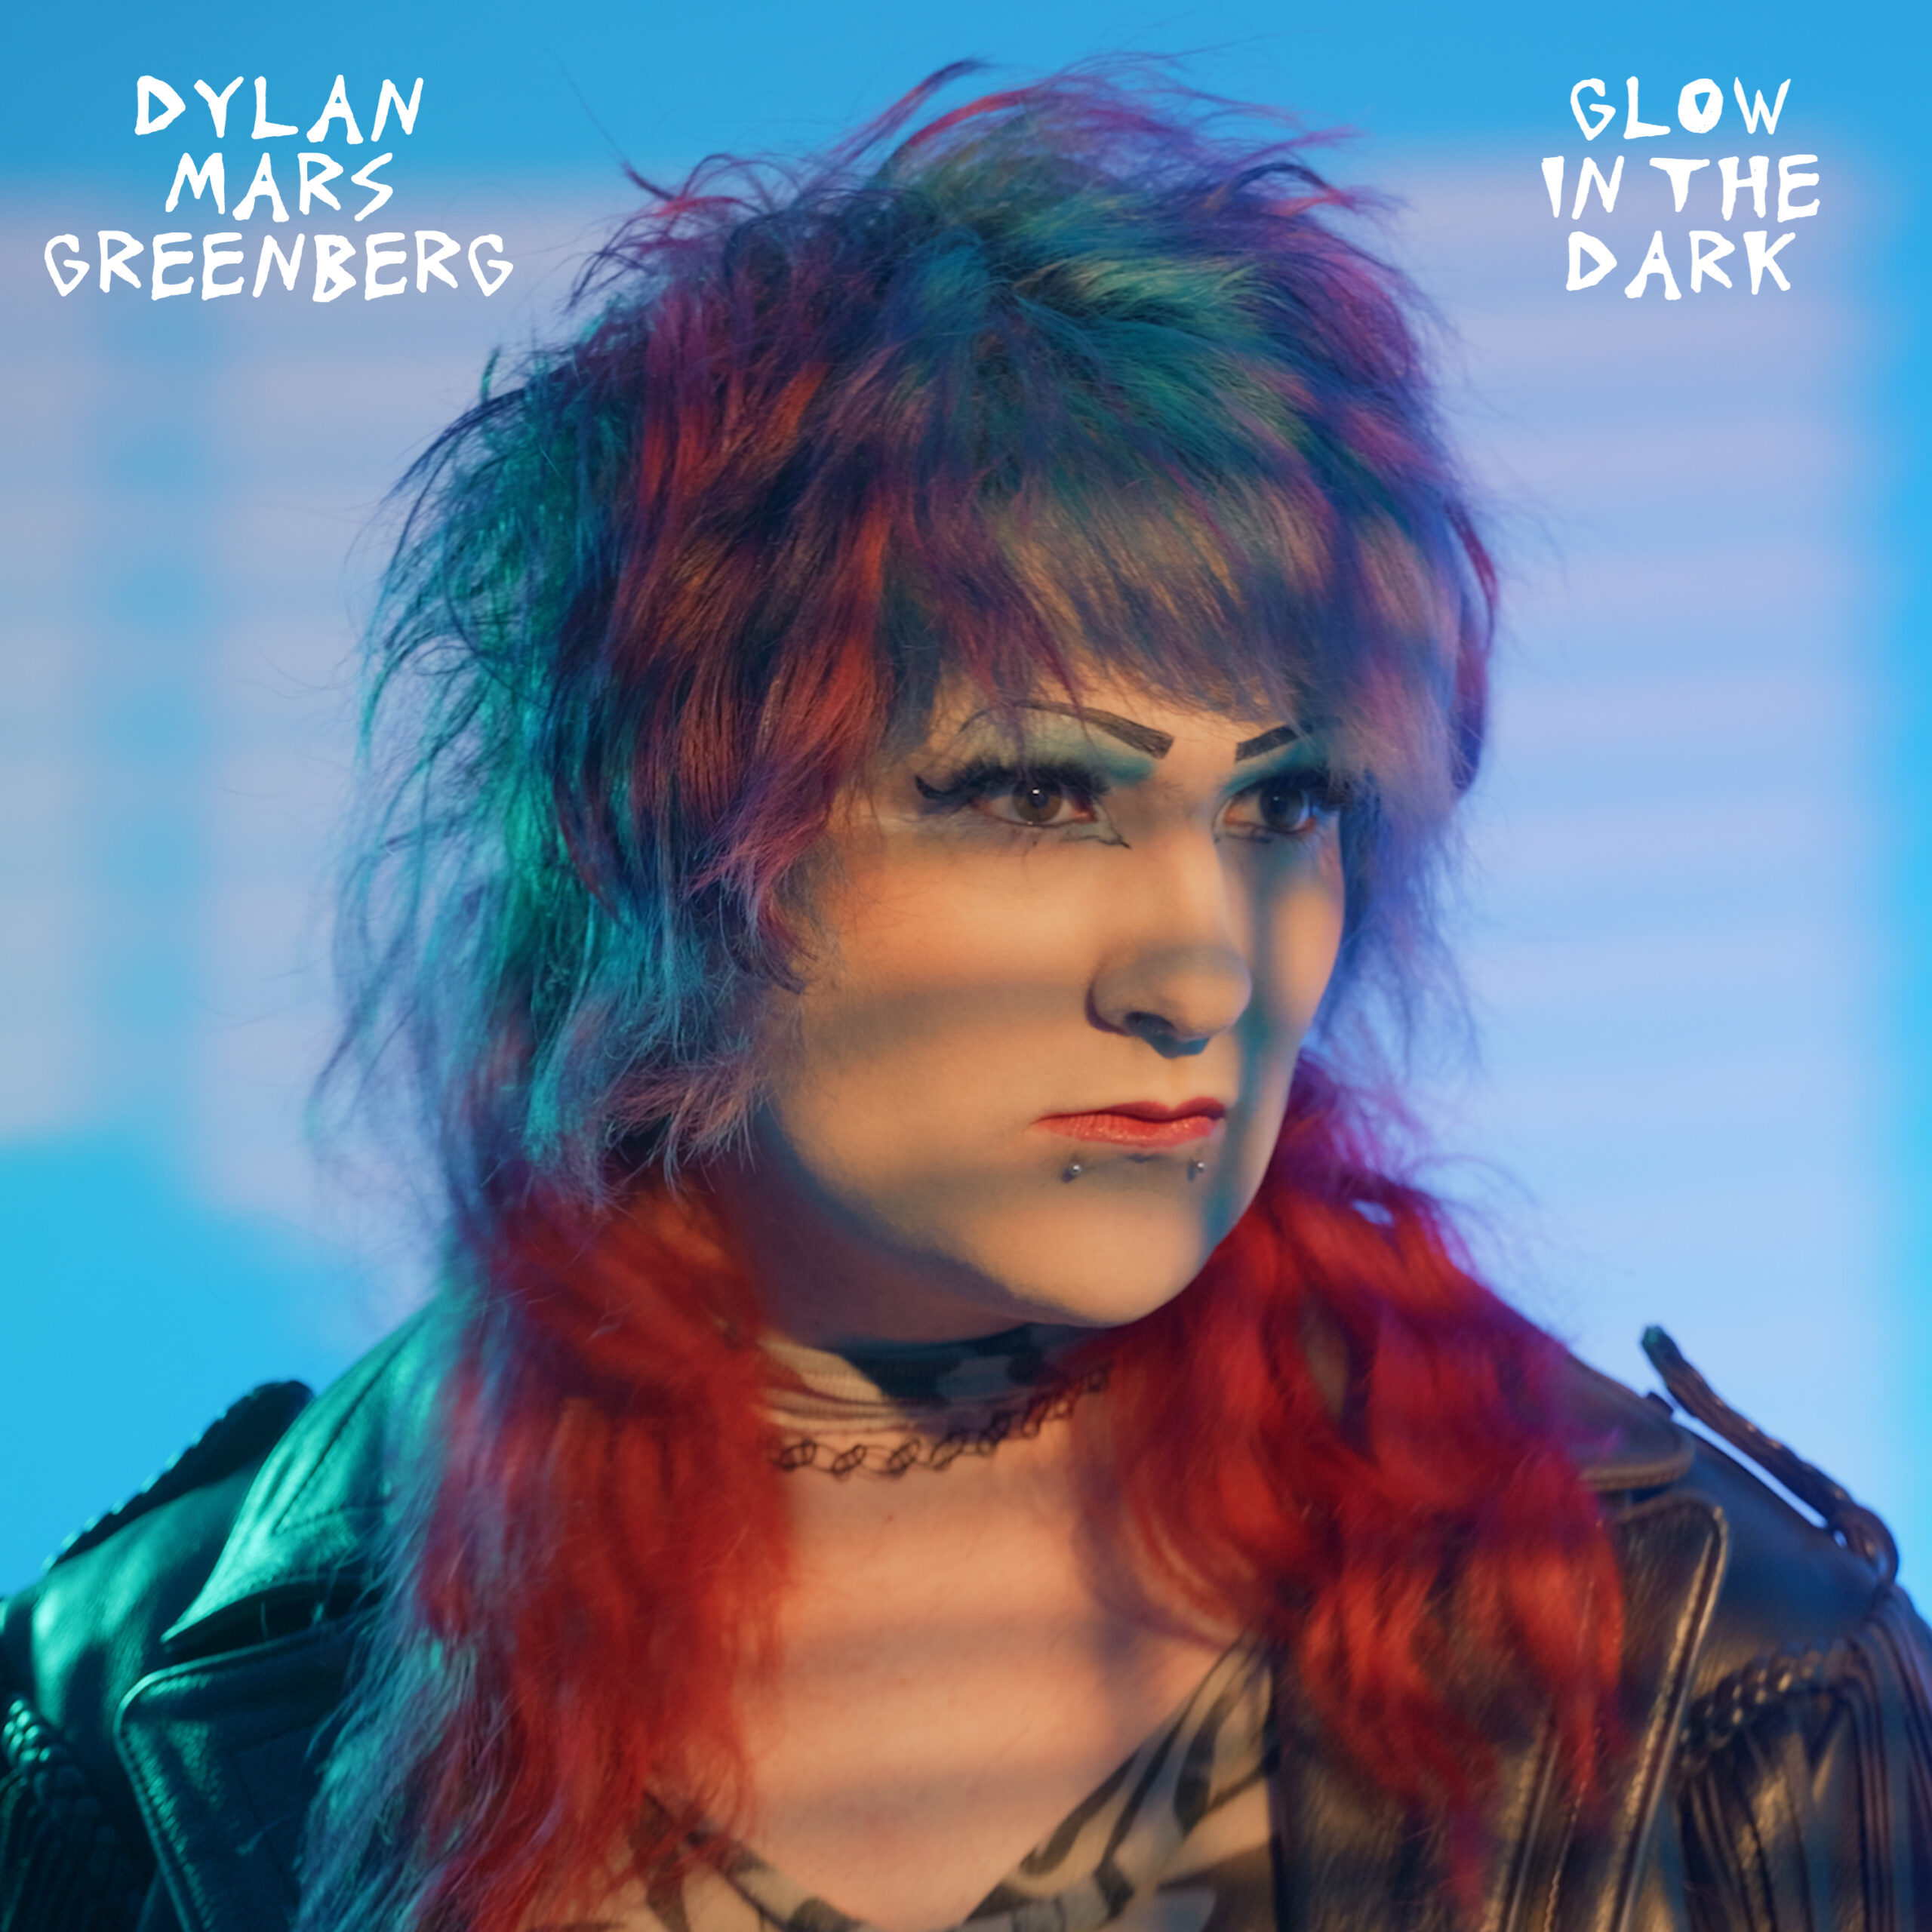 Dylan Mars Greenberg drops “Glow in the Dark” single & vid from latest psychotronic feature film project, premiering at Museum of the Moving Image on 3/30/24